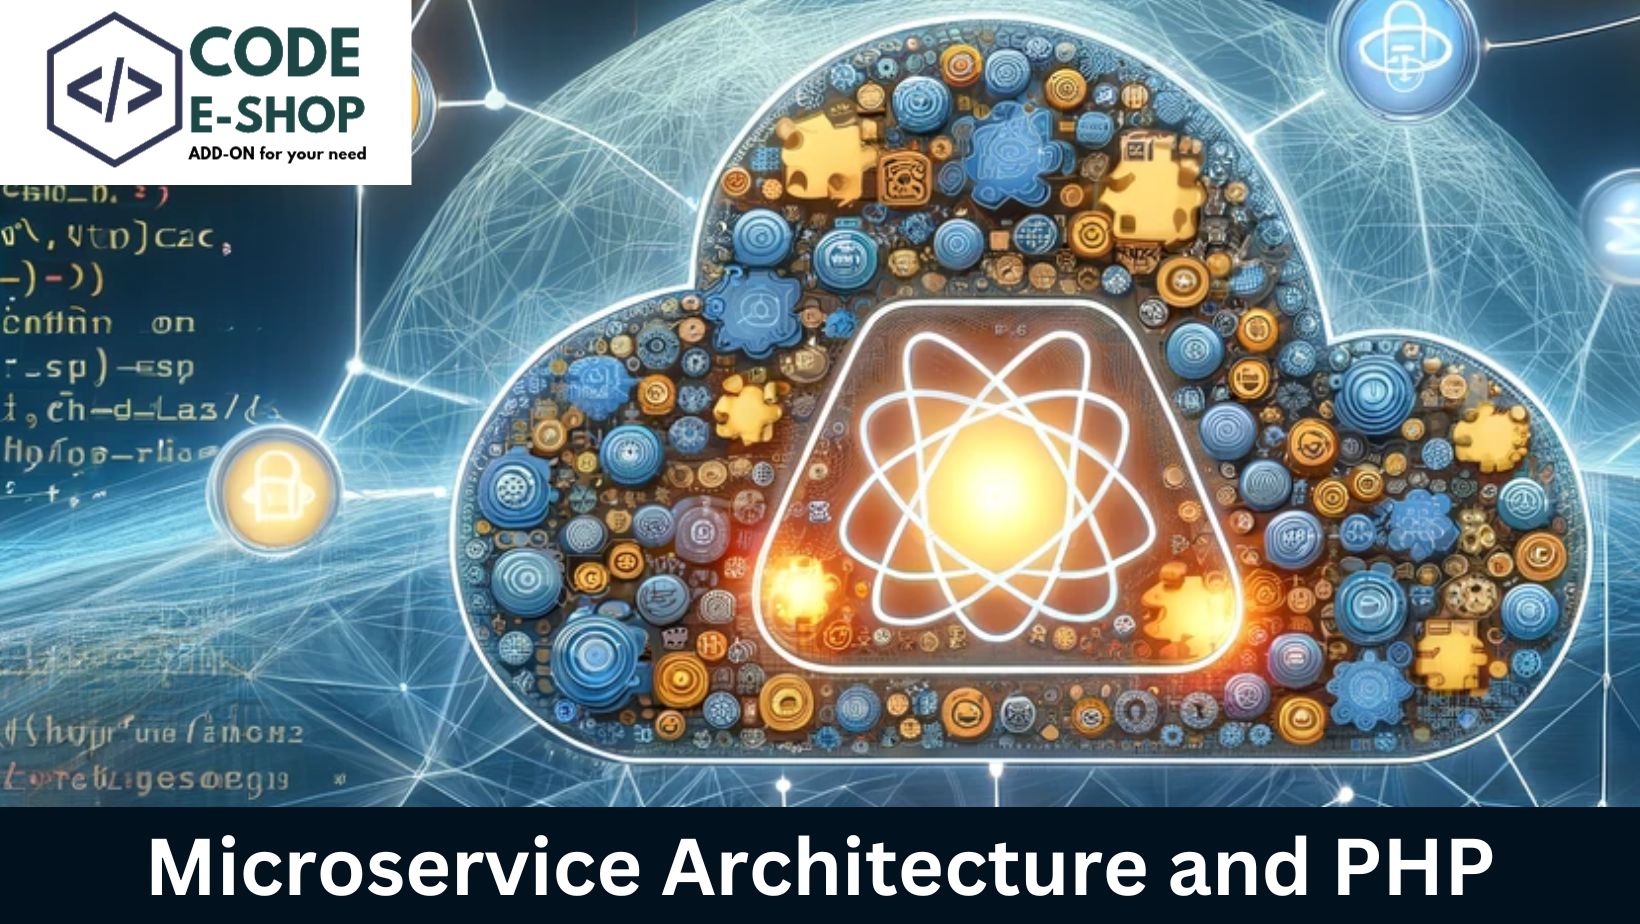 The Microservice Architecture and PHP